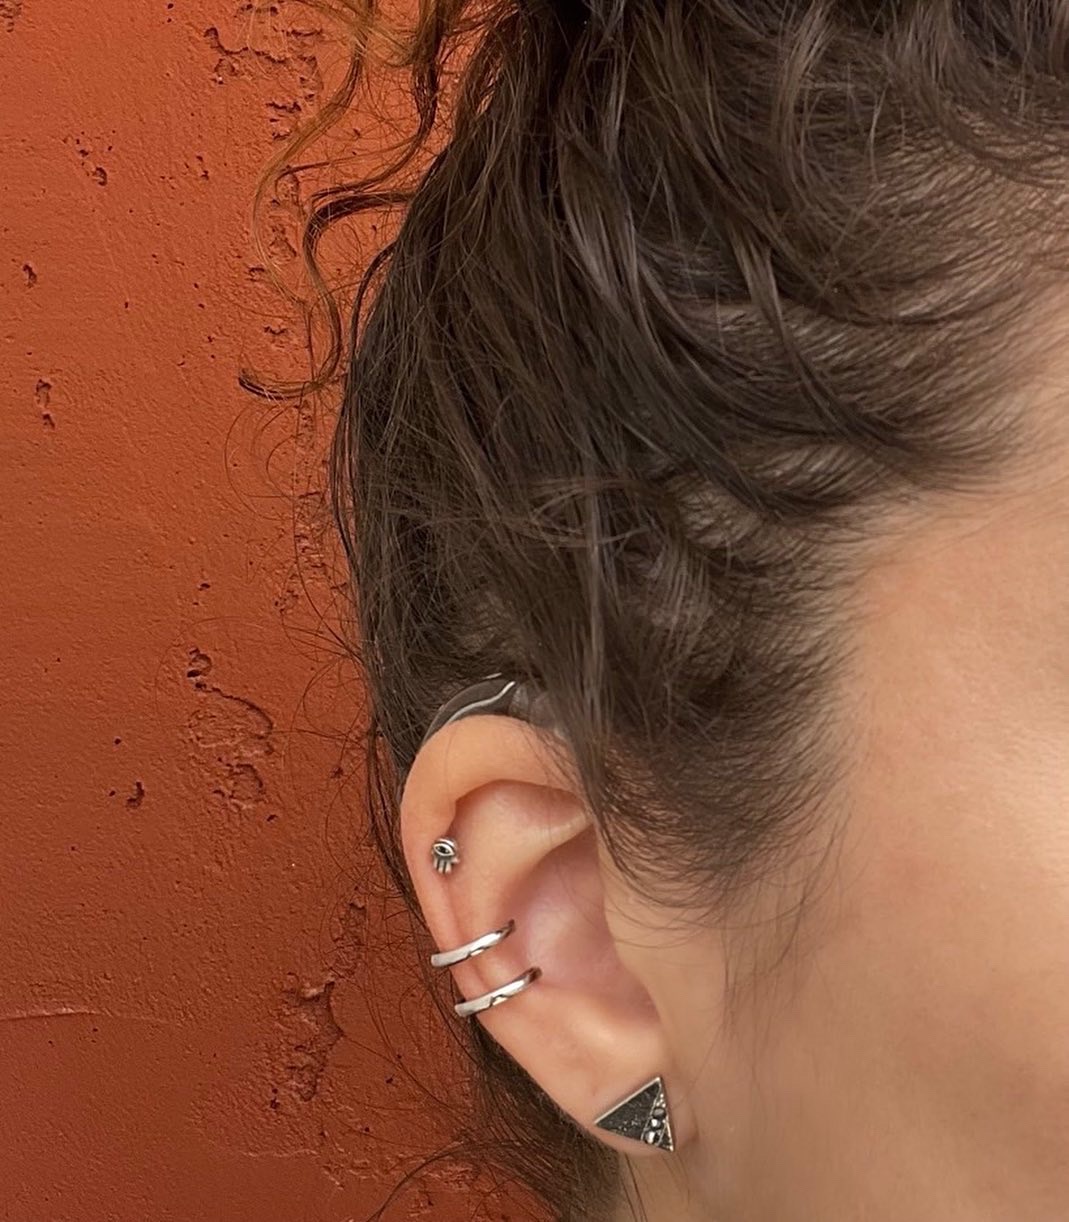 DeafMetal safety ring on a woman's ear